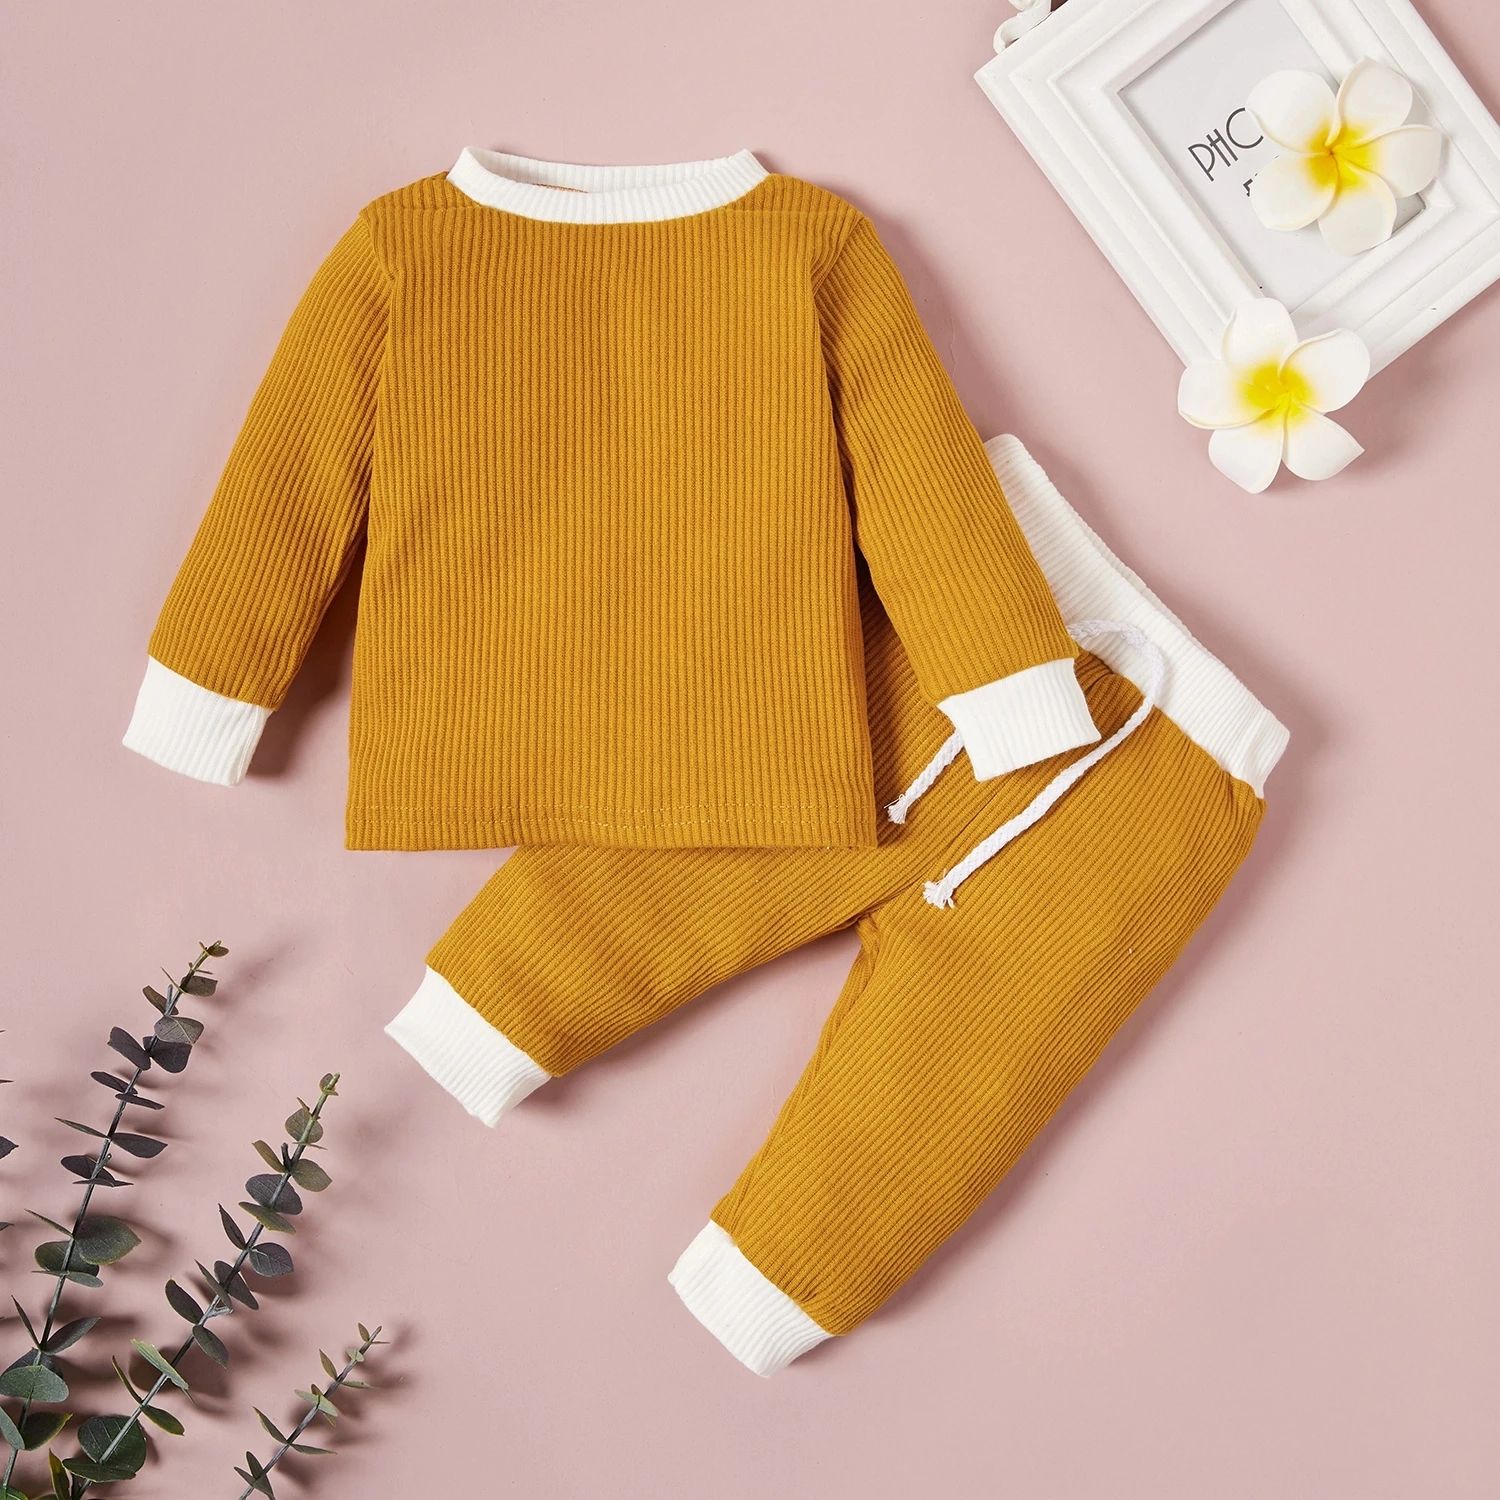 PatPat New Autumn and Winter Patchwork Baby Girl Sweet Baby's Sets Color Block Baby Girl Home Clothes